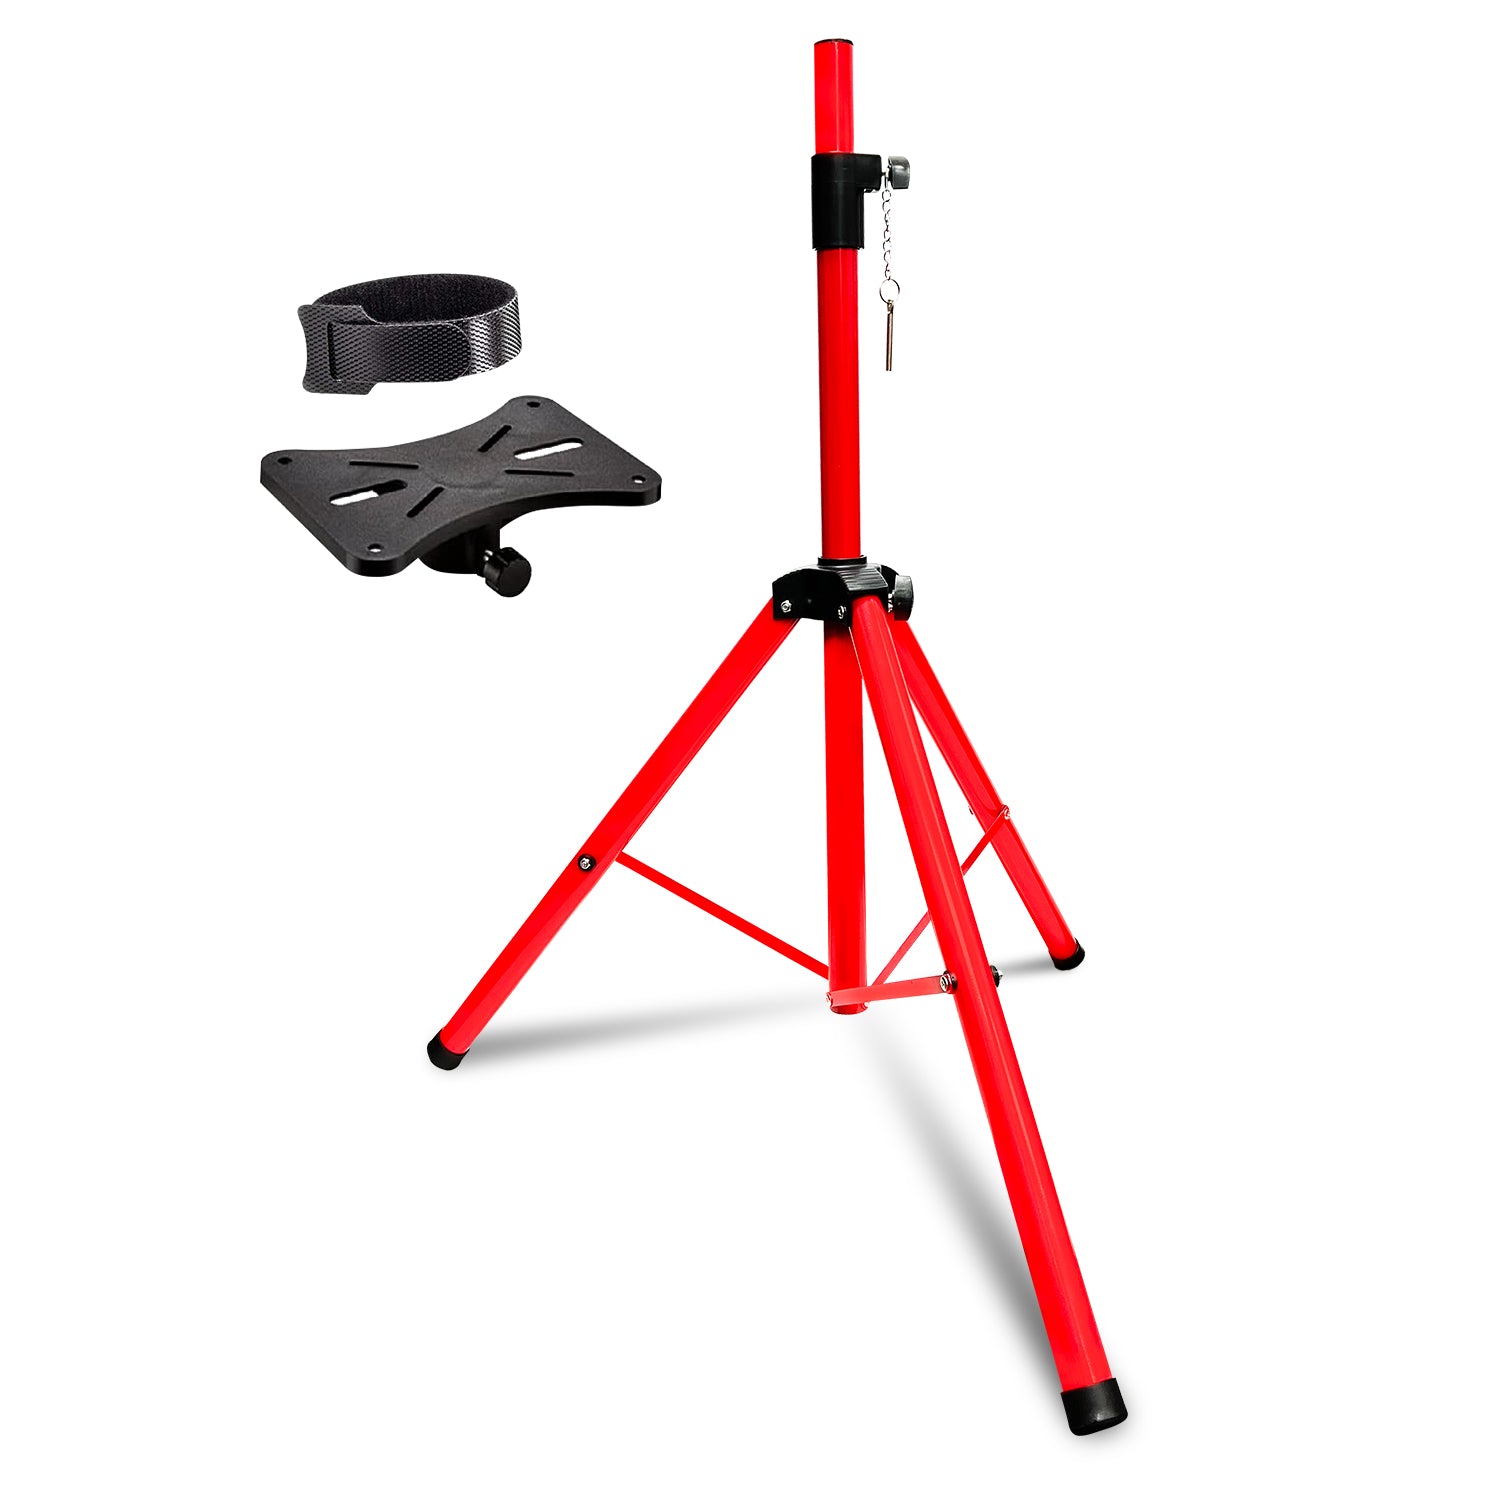 5 Core Universal Speaker Stand Red w Mount Bracket • Height Adjustable Tripod Stands 100 lbs Capacity